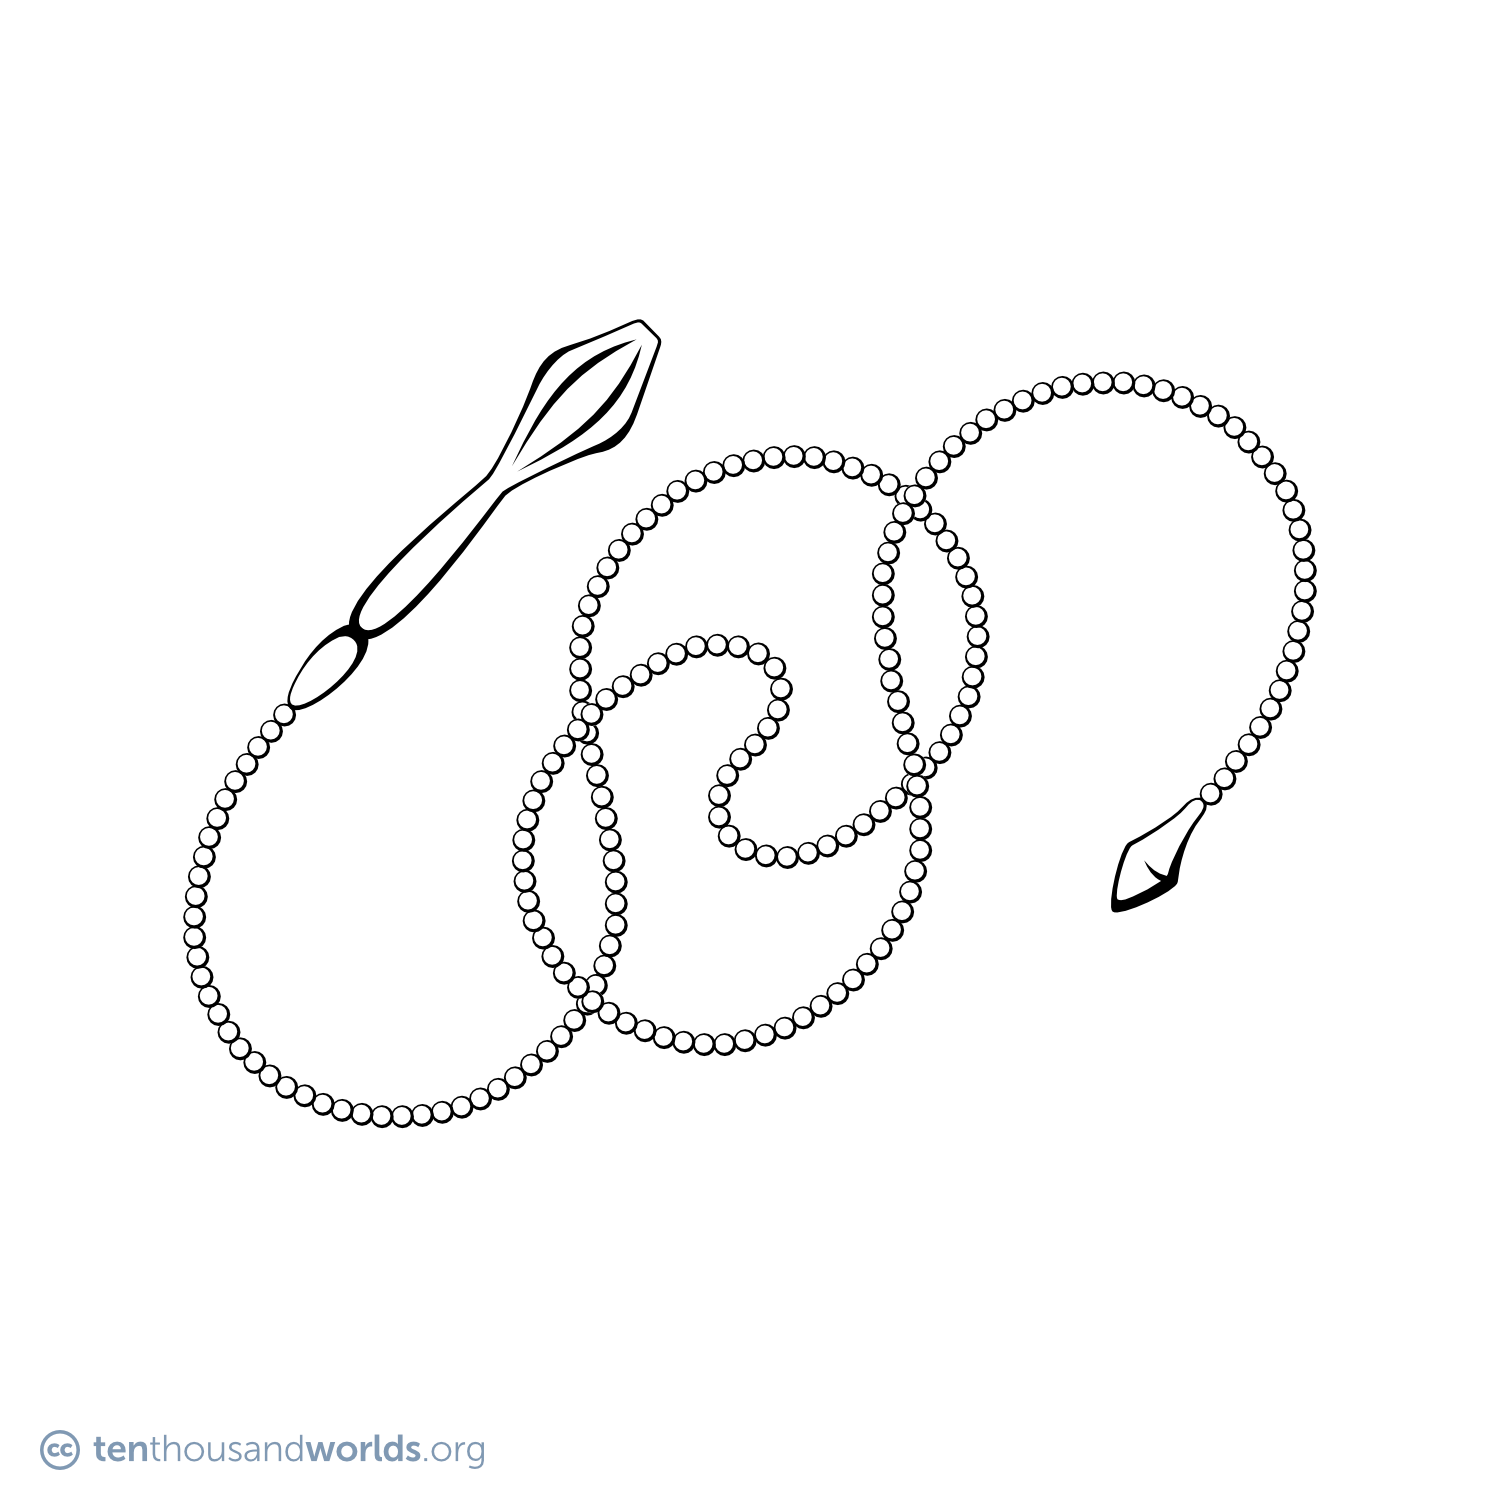 An ink outline of a club and a spindle attached by a long, looping chain.